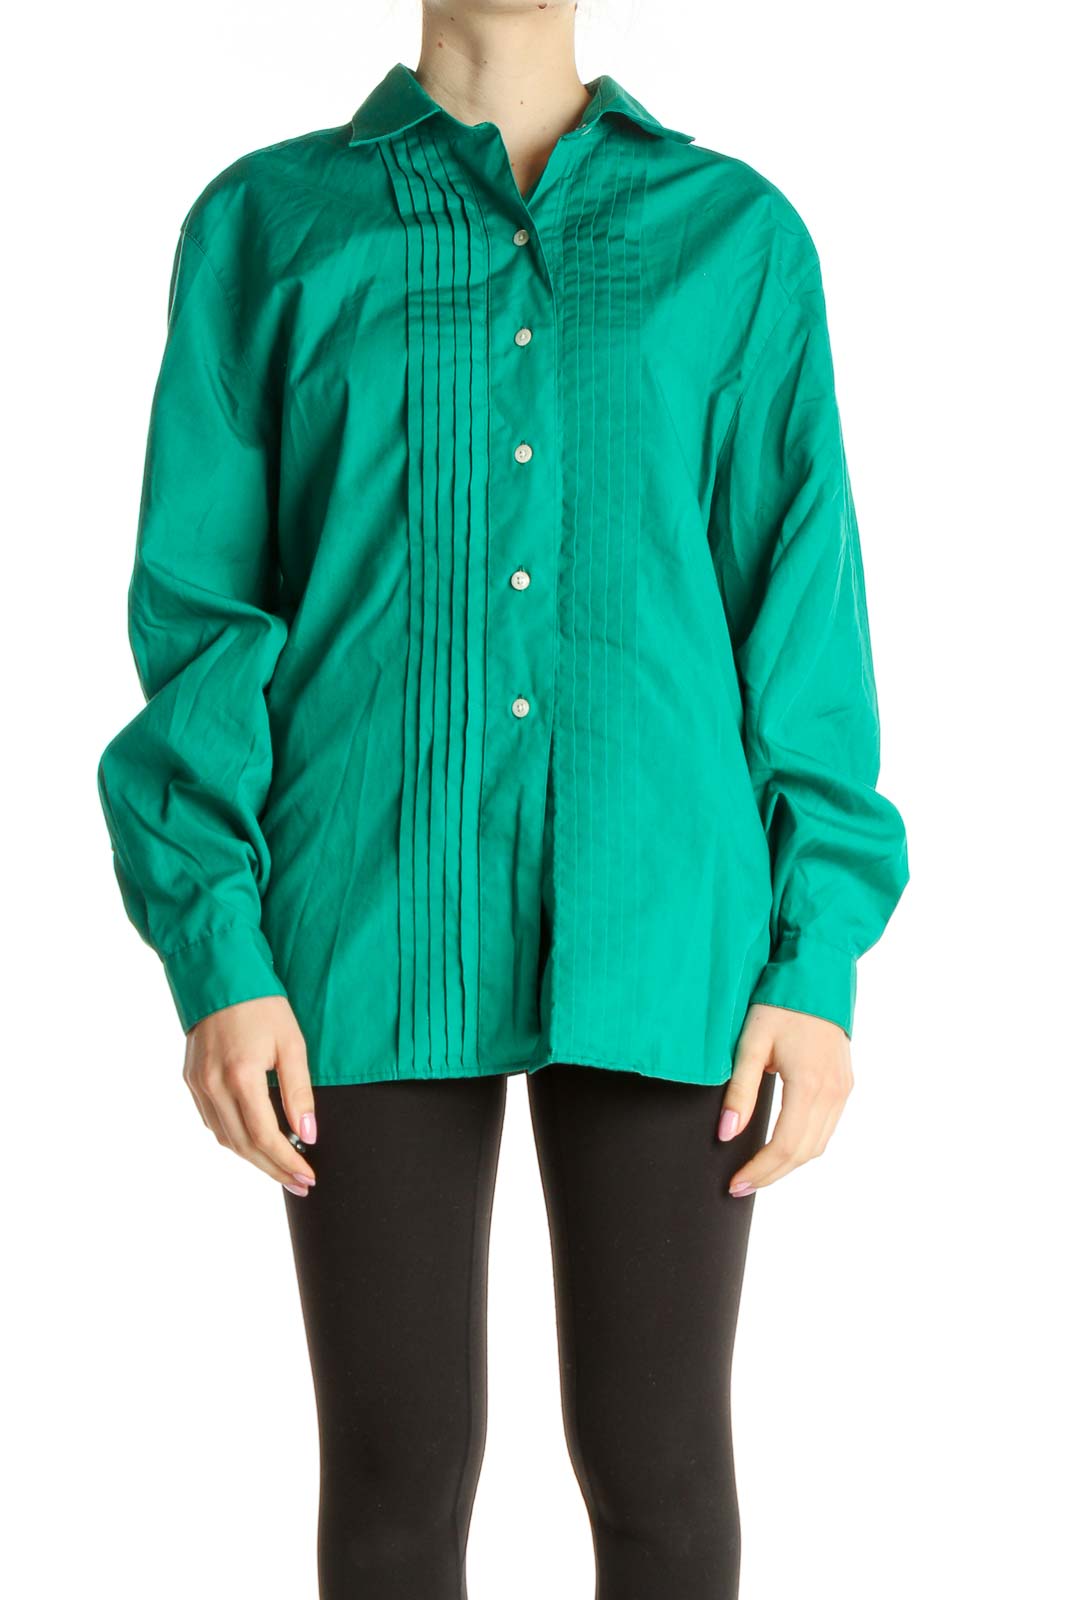 Green Solid Formal Shirt Front